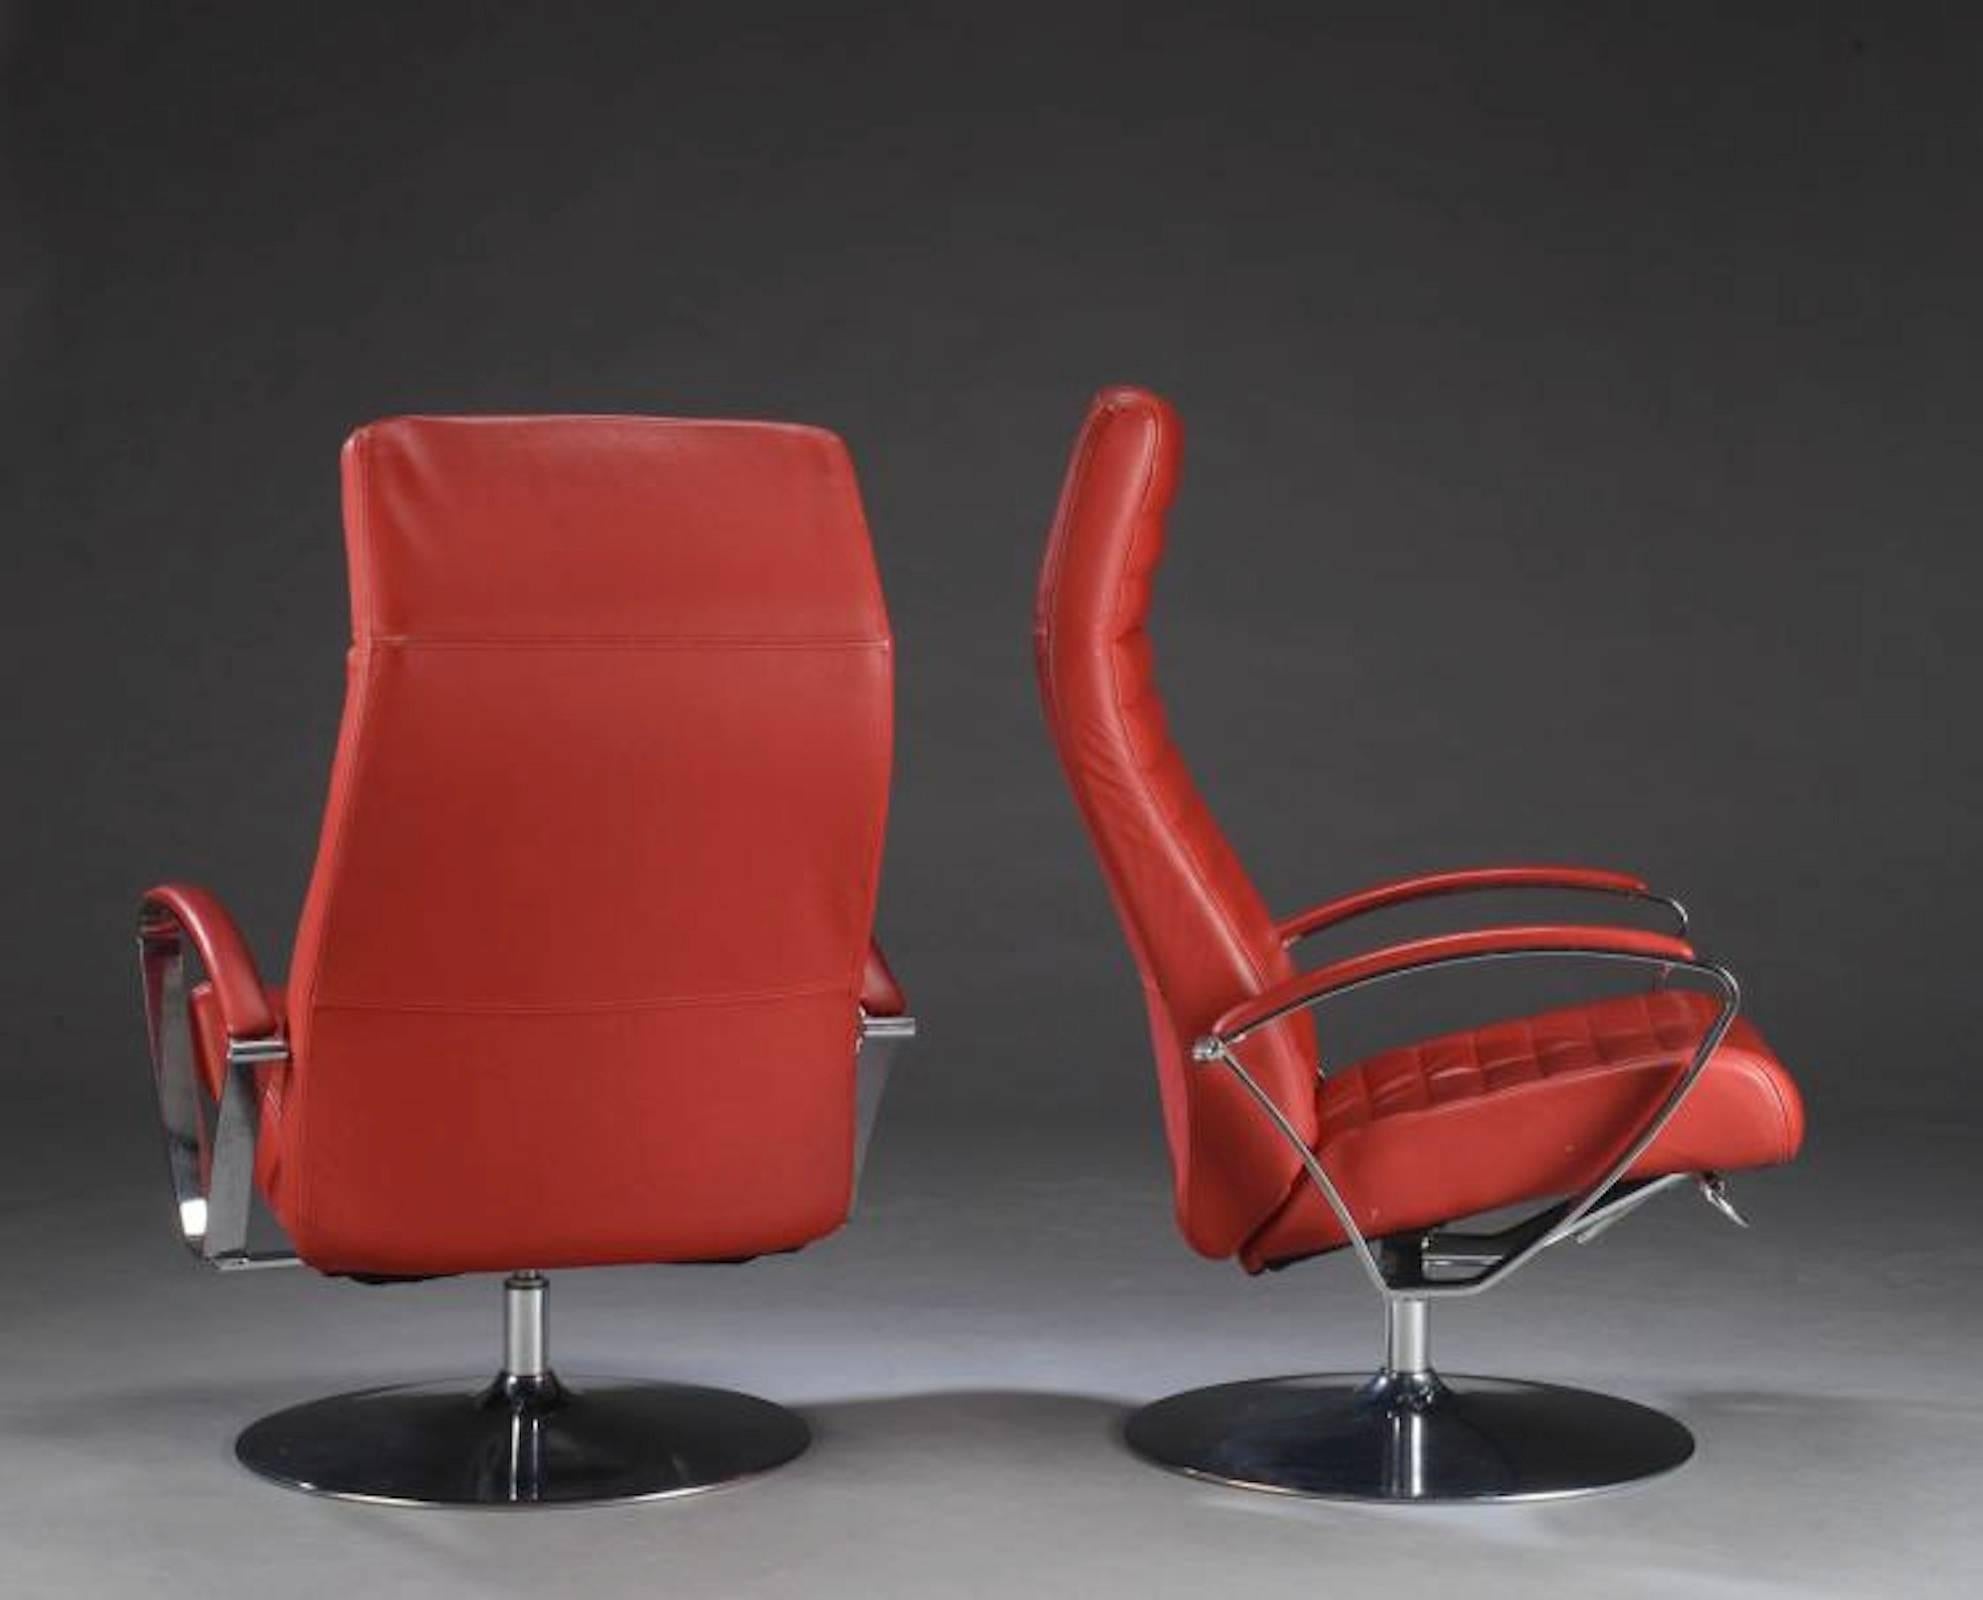 Sleek leather chairs with chrome arms and unusual round chrome base. Adjustment bar on base, covered arm rests, comfortable leather seats.

(Please confirm item location with dealer).
  